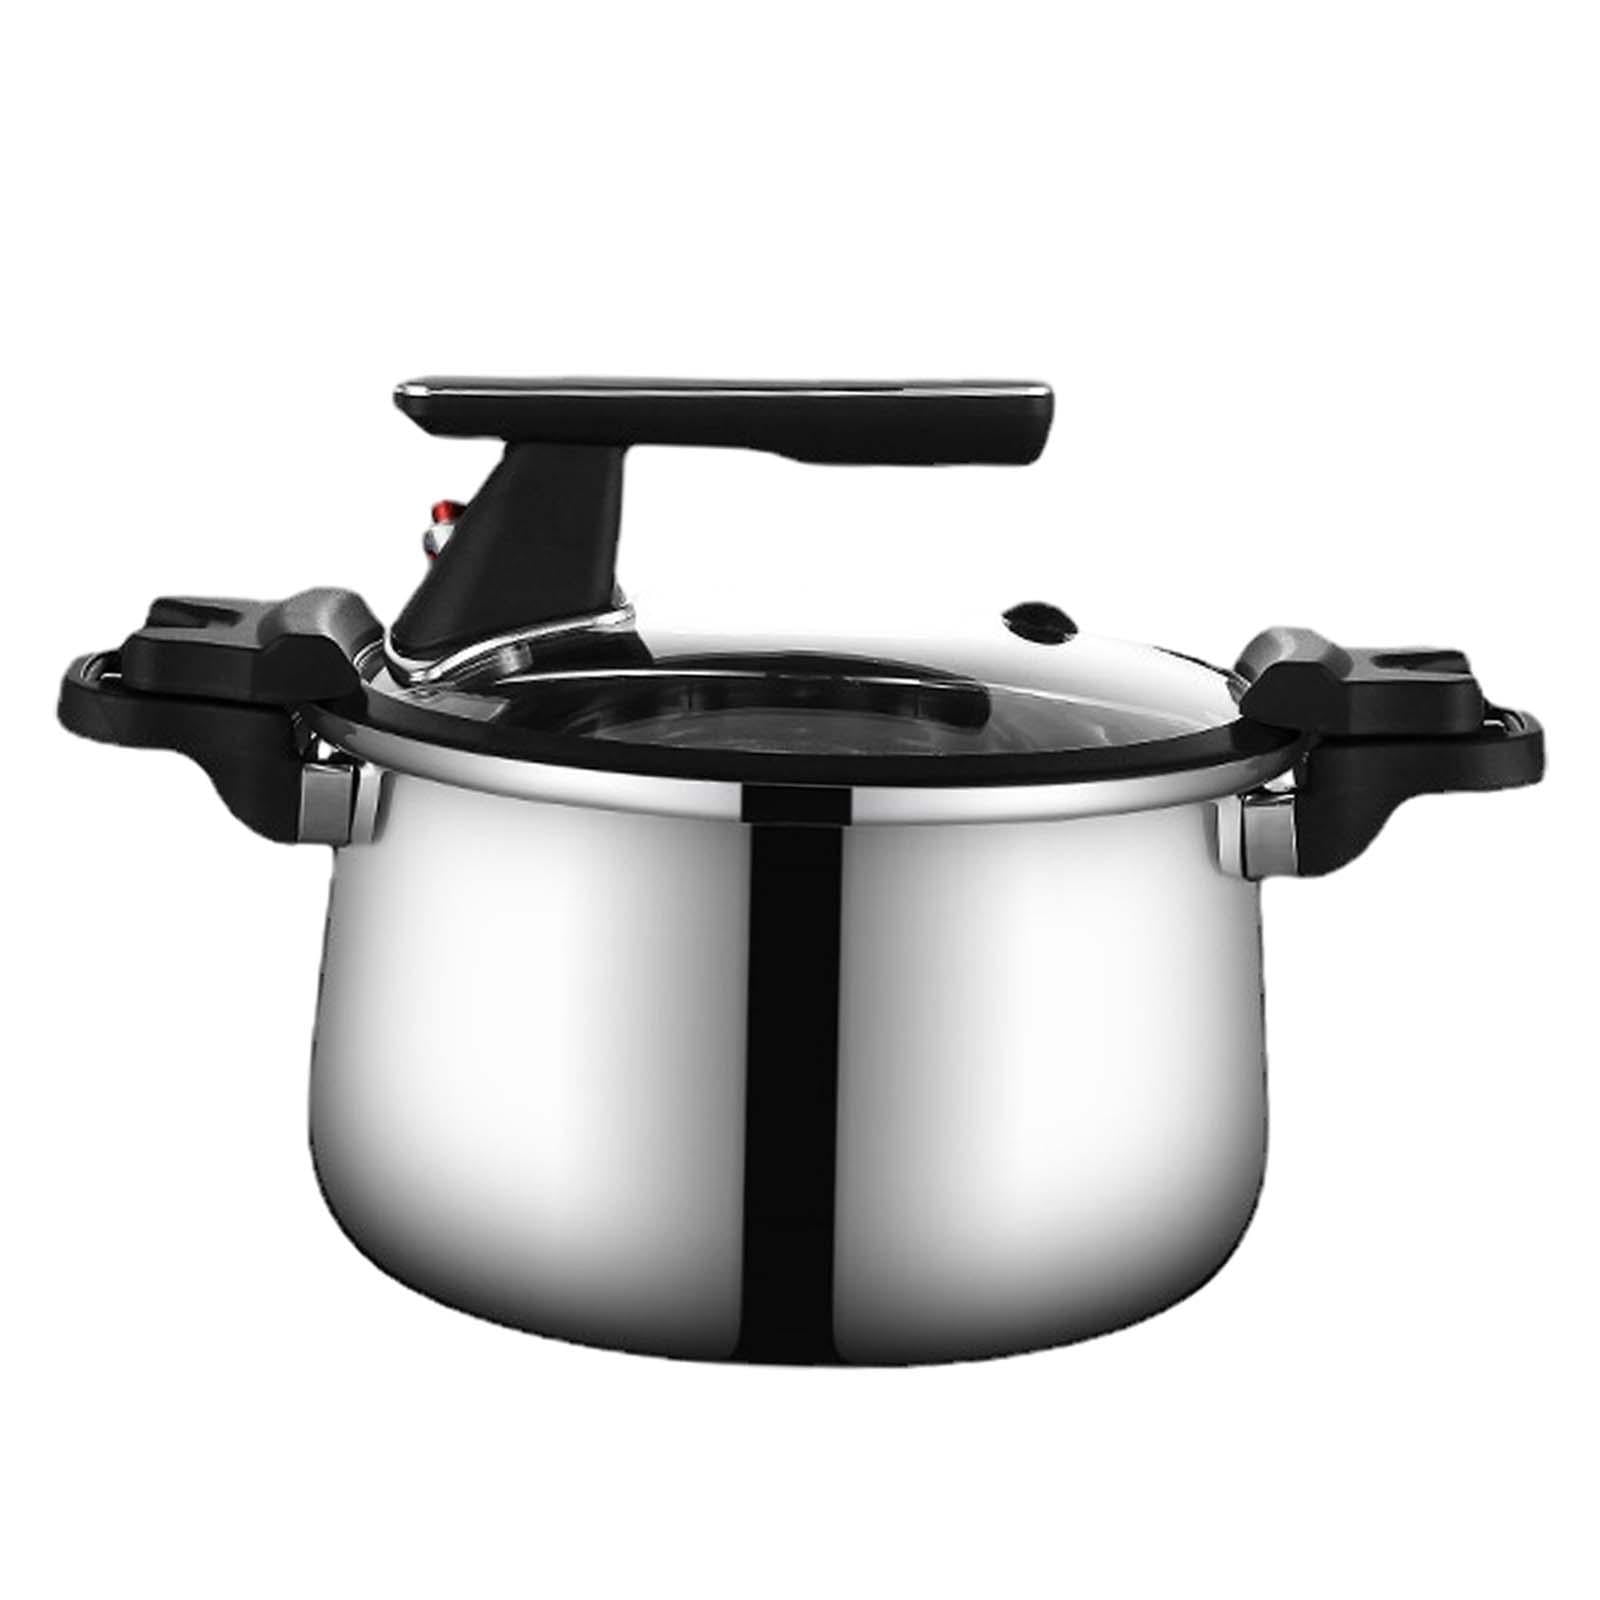 304 Stainless Steel Pressure Cooker Gas Stove Cooking Cookware Ollas  Pressure Canner Arrocera Cookware Ninja Foodi Cooker Pots